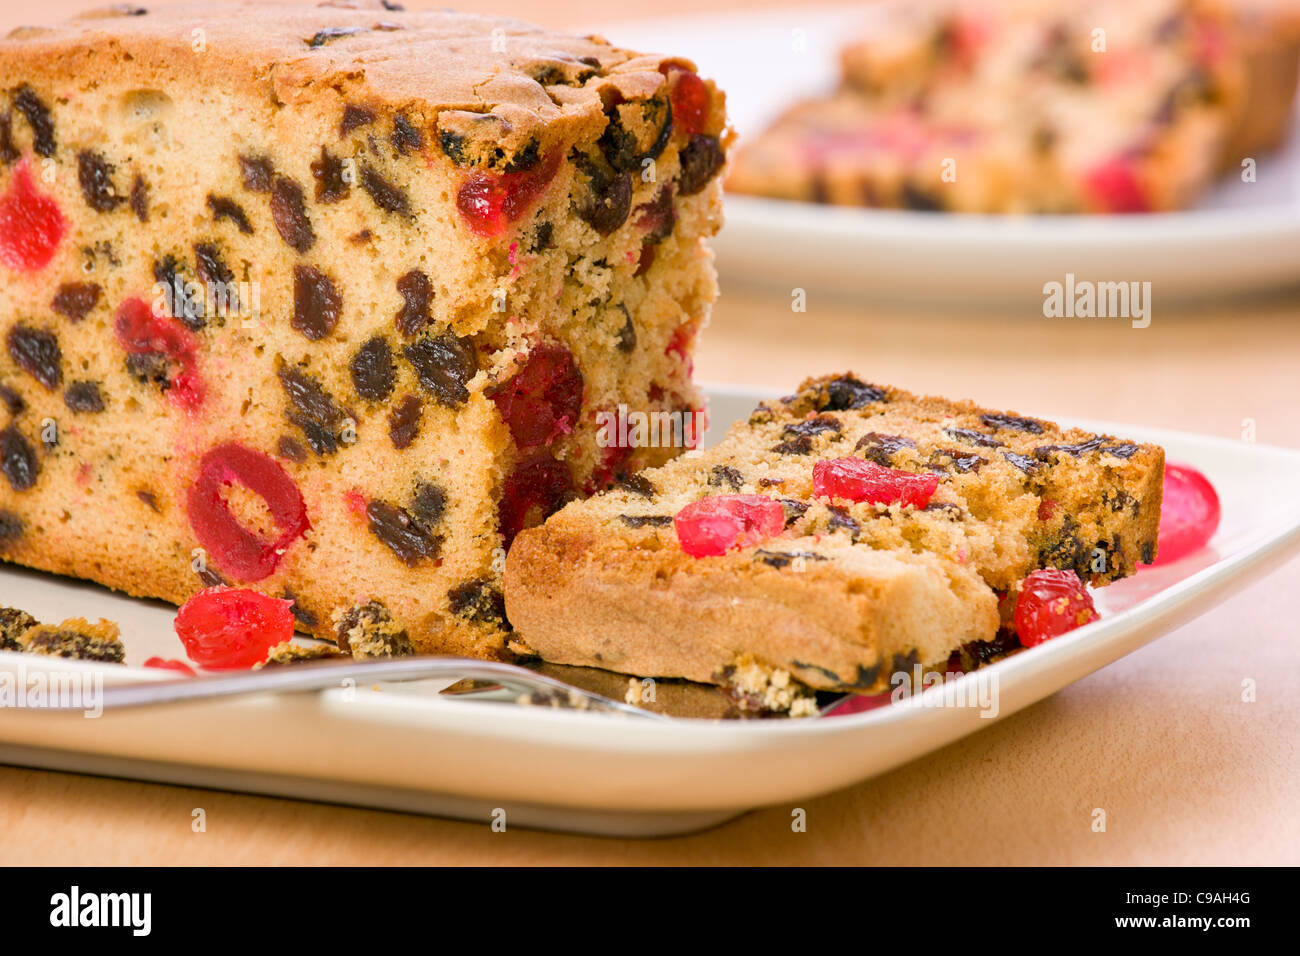 Fruitcake with a slice on cake knife and on a plate slice cut and in the background crumbs scattered on plate Stock Photo